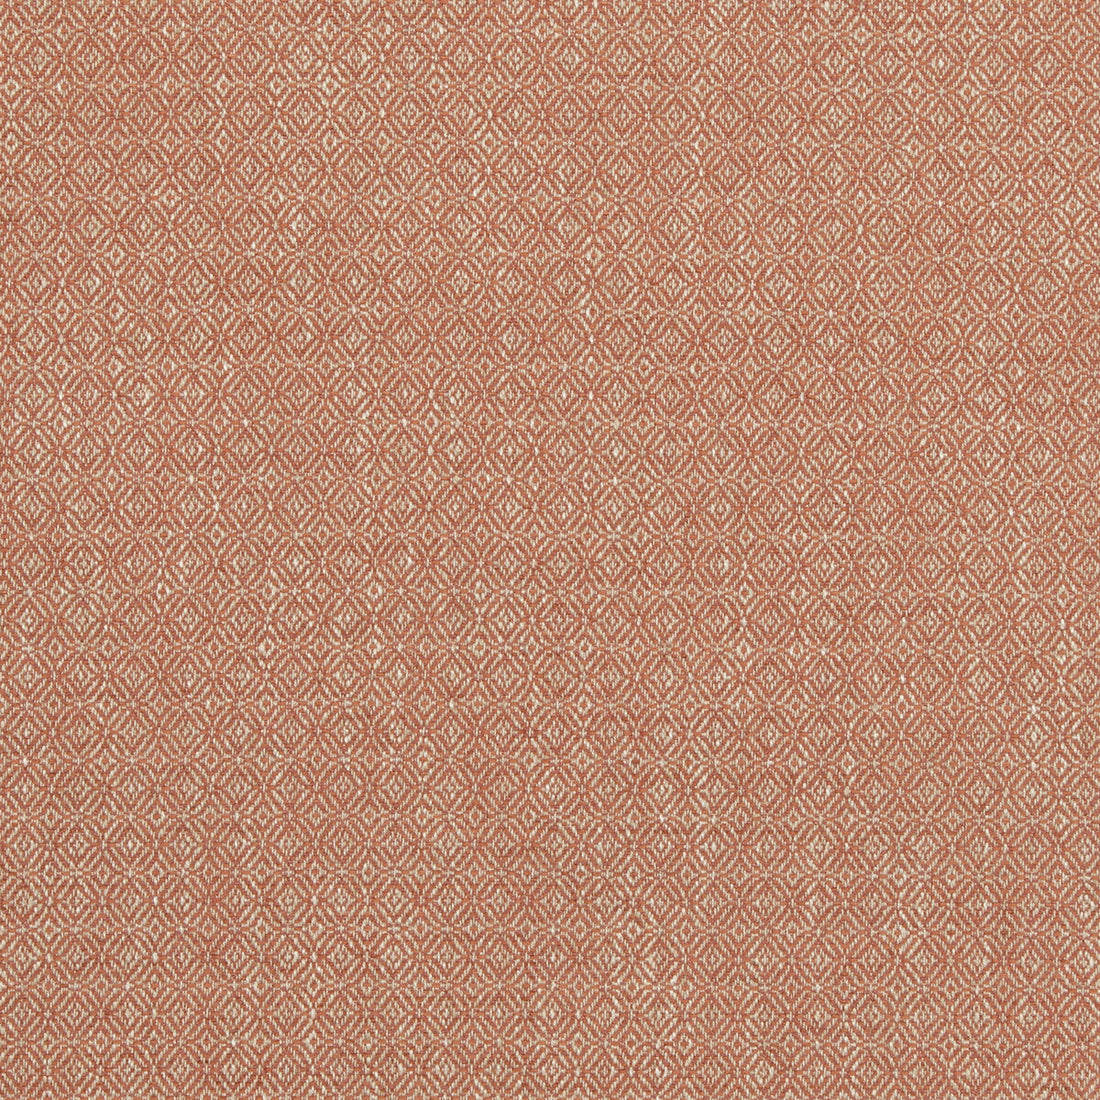 Kenton fabric in spice color - pattern BF10868.330.0 - by G P &amp; J Baker in the Essential Colours II collection